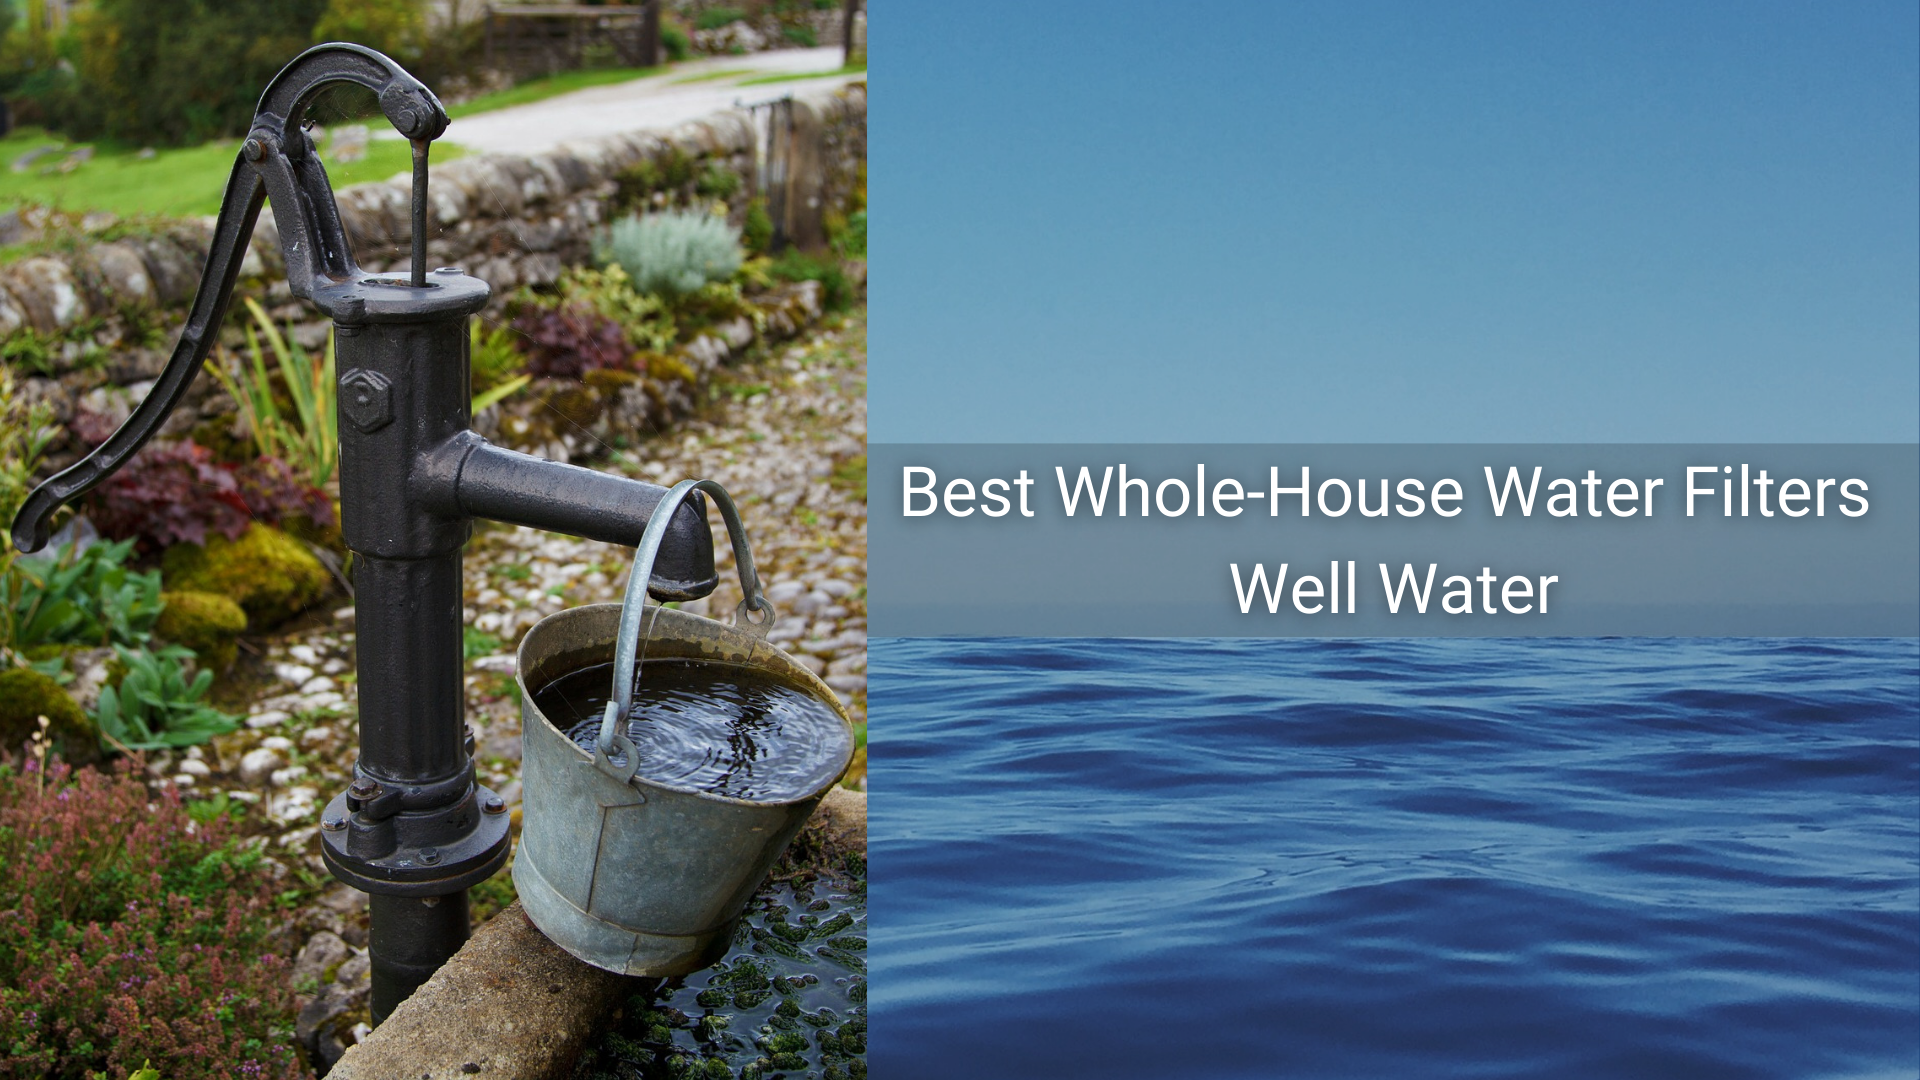 7 Best Whole House Water Filters for Well Water (REVIEWS & BUYING GUIDE)